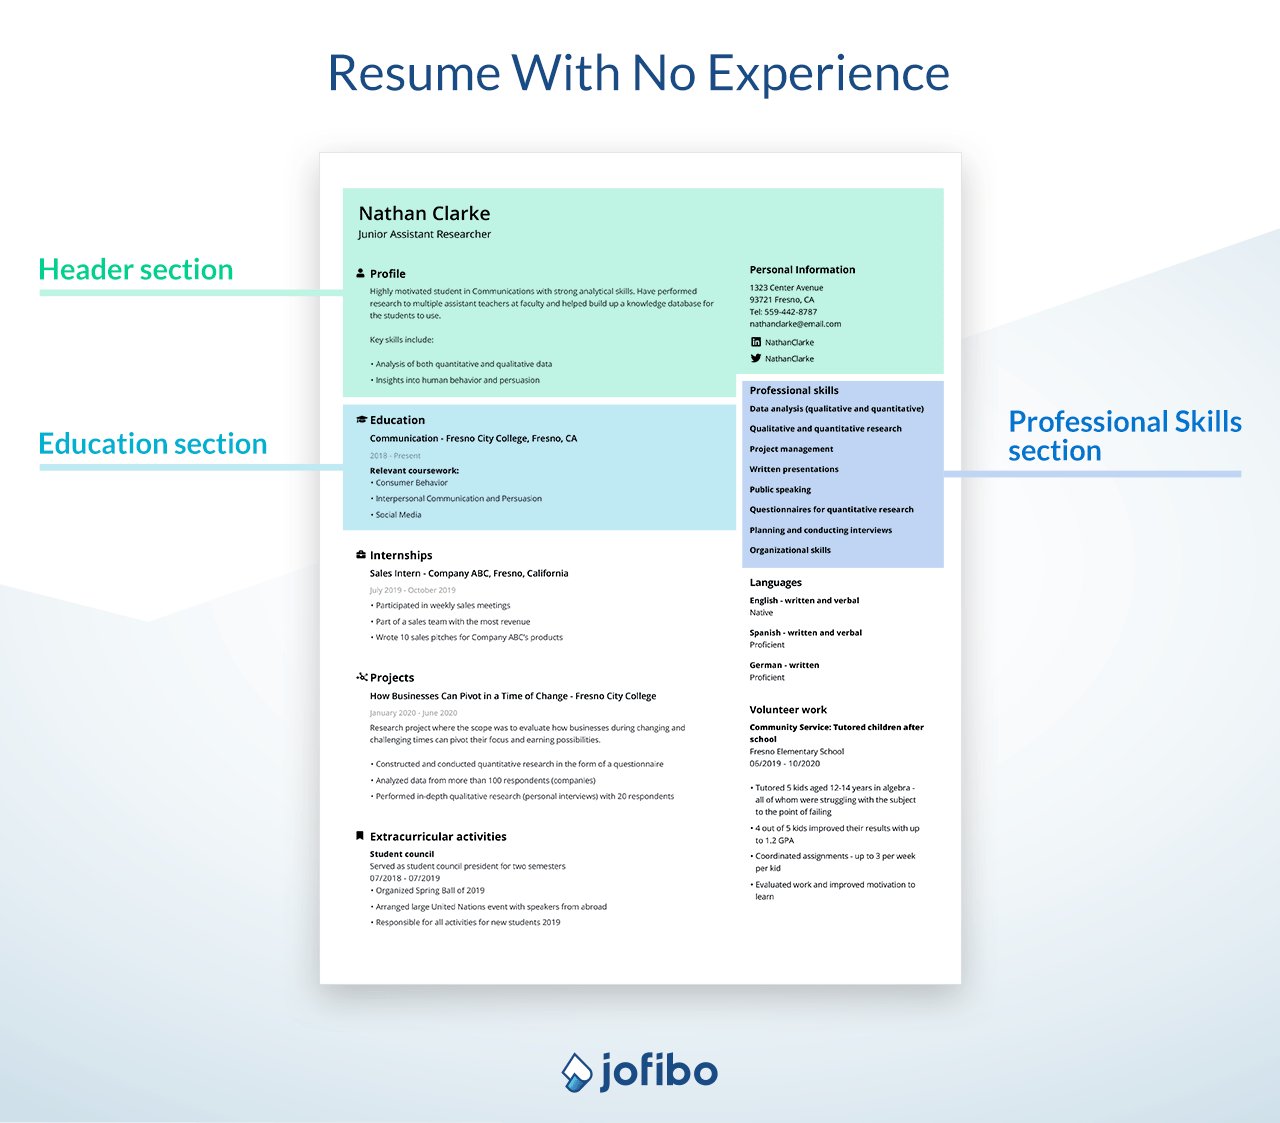 An image of a students resume with no experience